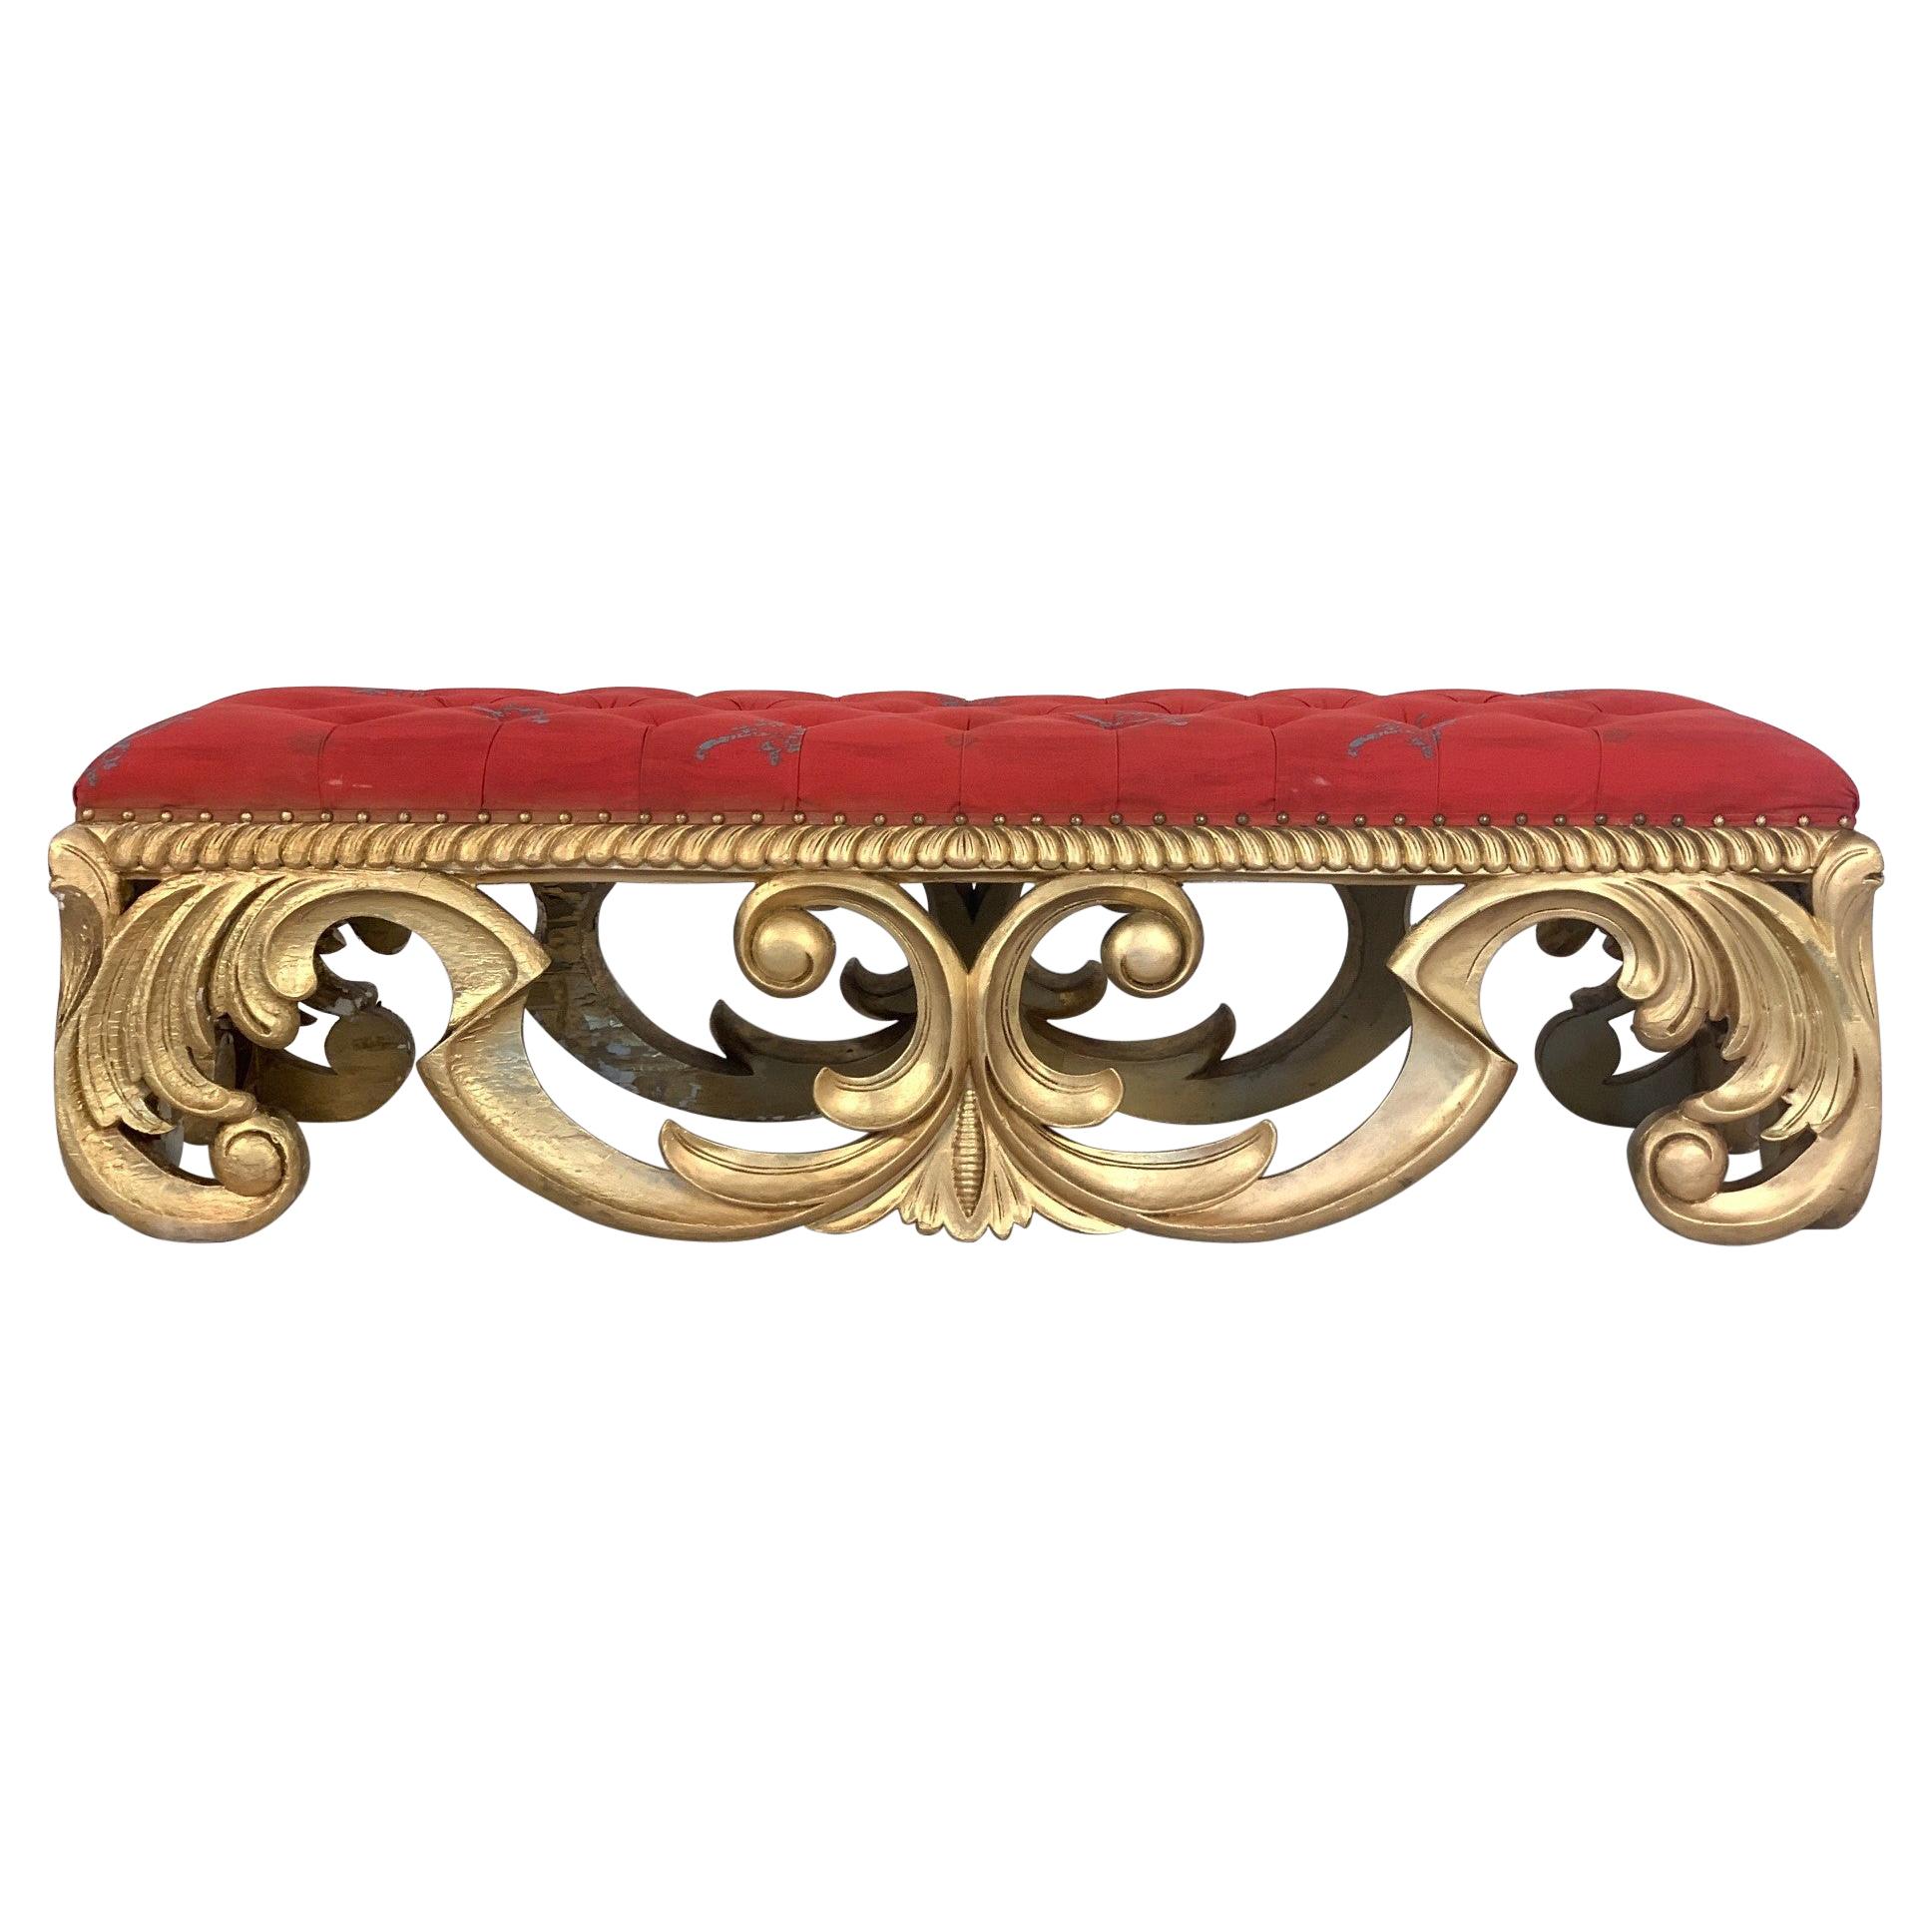 19th Century French Louis XIV Style Giltwood Bench